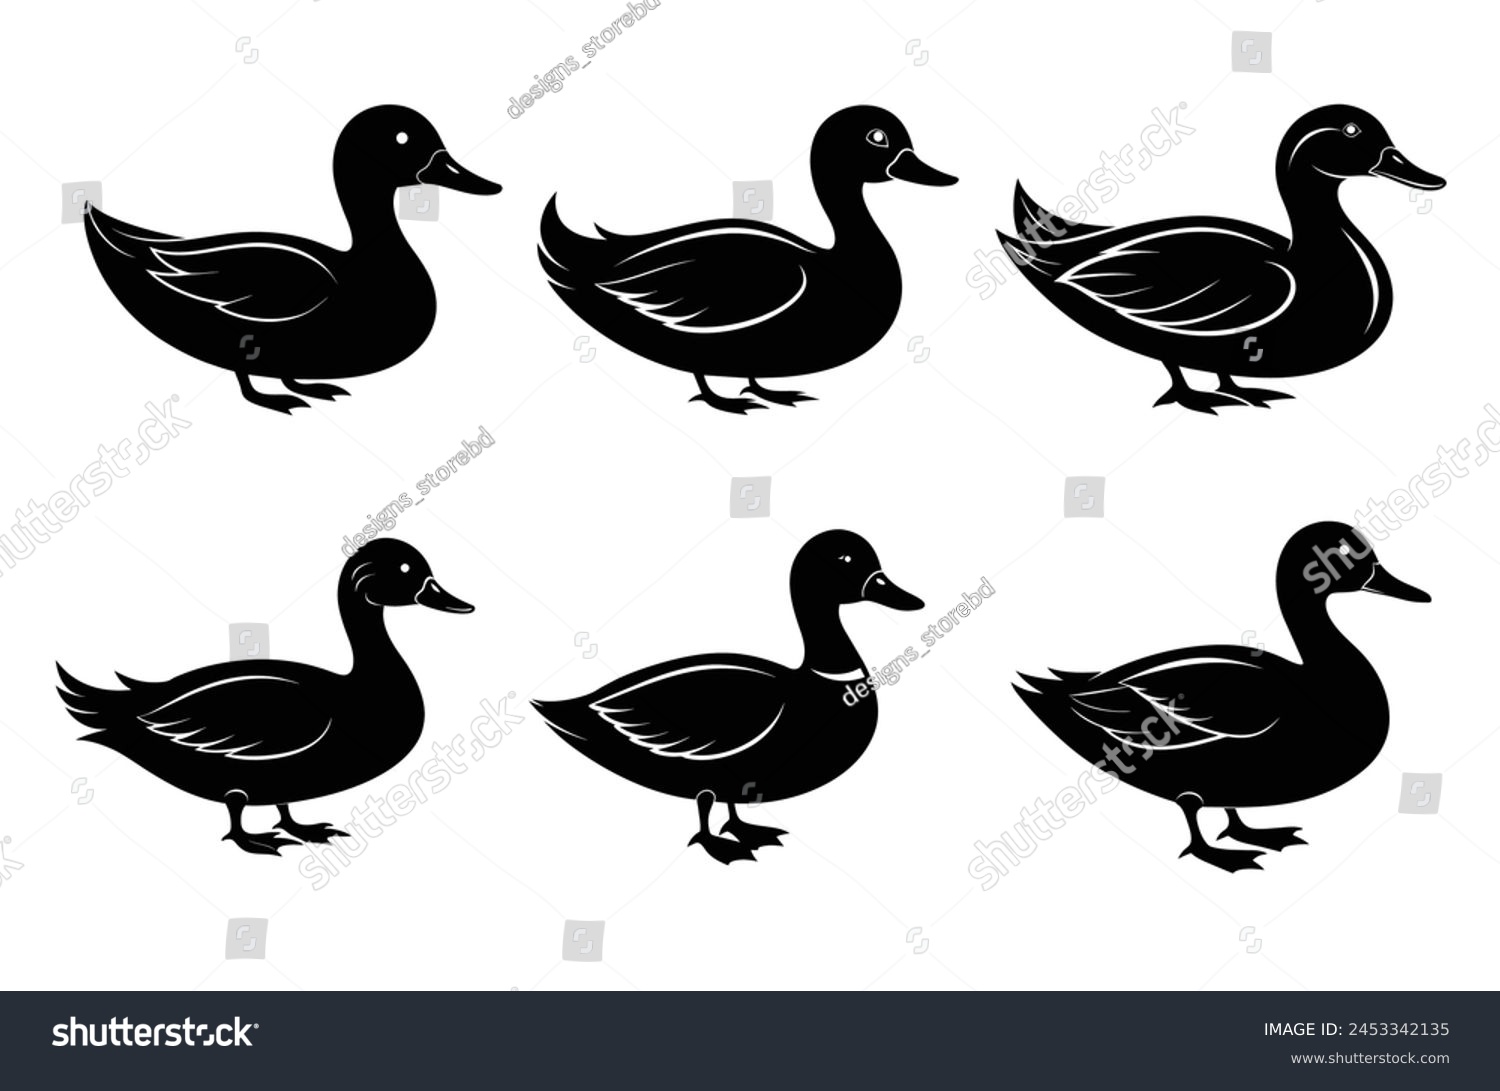 SVG of Duck silhouette vector illustration with on white background svg